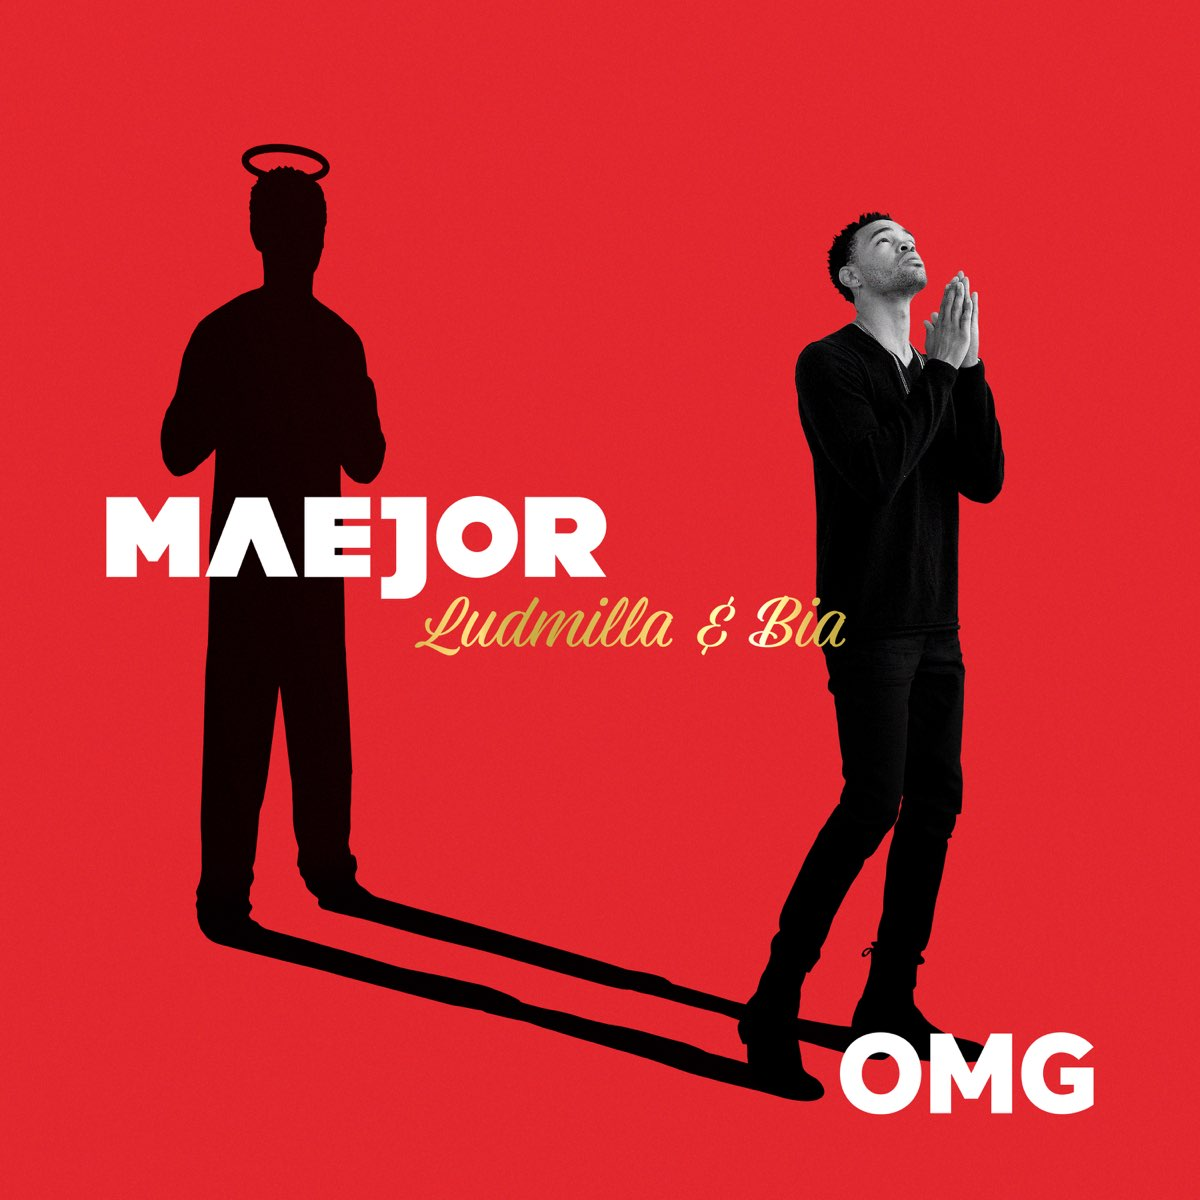 Maejor featuring LUDMILLA & BIA — OMG cover artwork